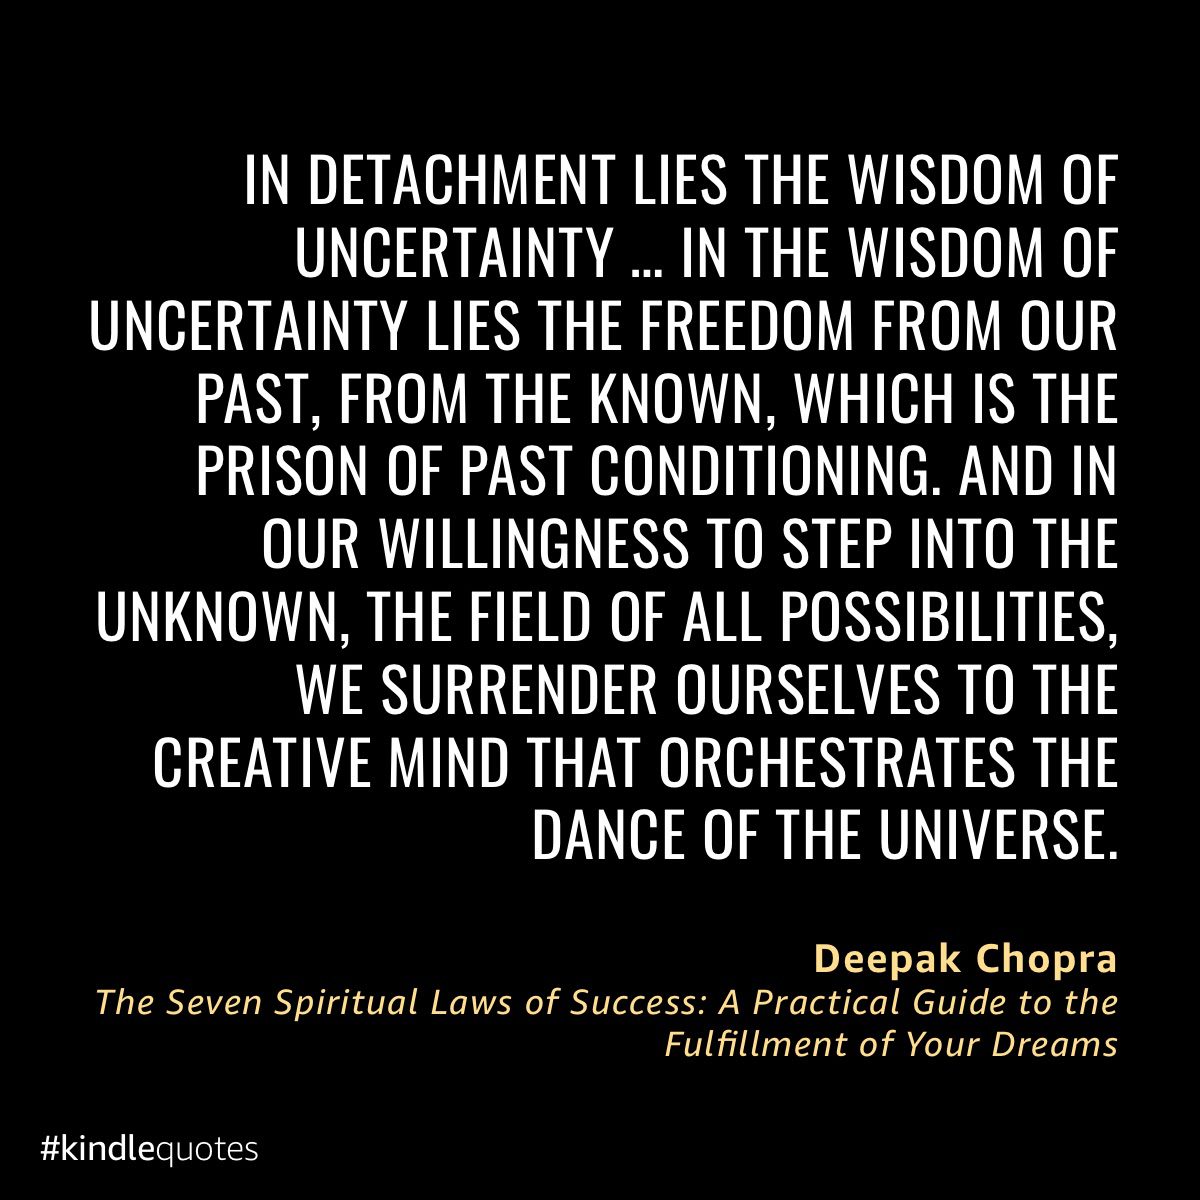 In detachment lies the wisdom of uncertainty... in the wisdom of uncertainty lies the freedom from our past, from the known, which is the prison of past conditioning. And in our willingness to step into the unknown, the field of all possibilities, we surrender ourselves to the creative mind that orchestrates the dance of the universe.”
Deepak Chopra